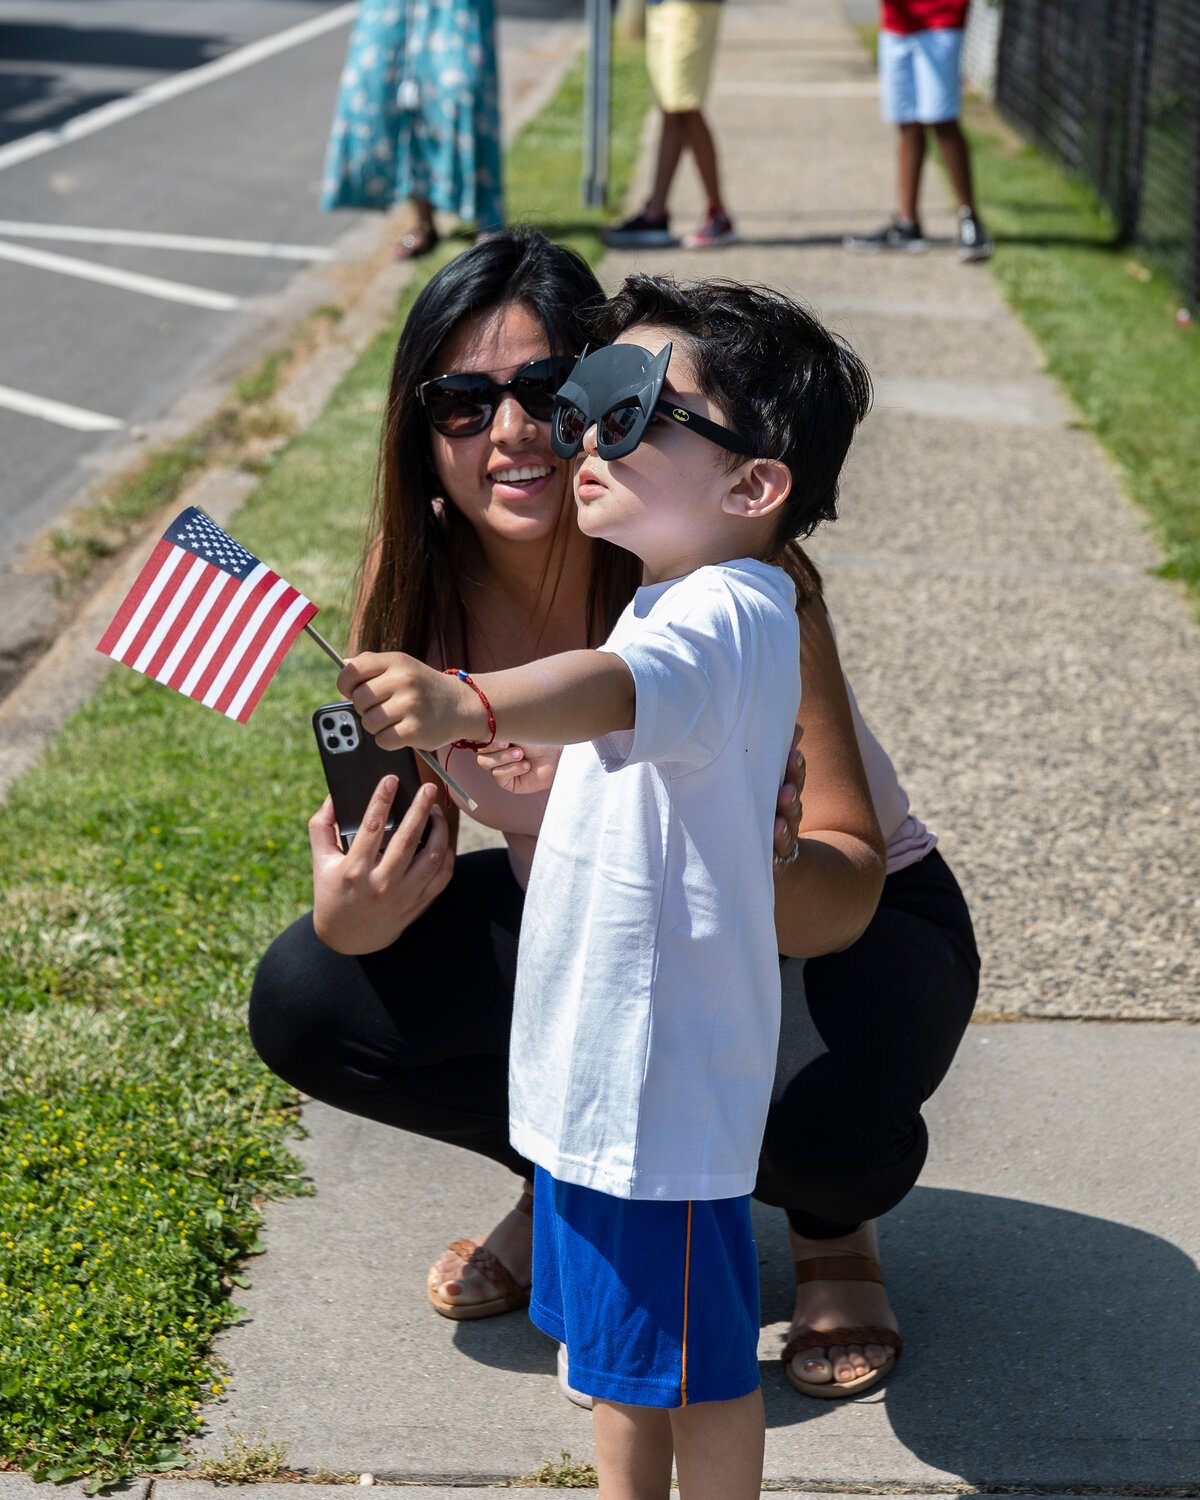 Nevin Gonzalez, at left, with his mom Megan were excited to watch the parade.